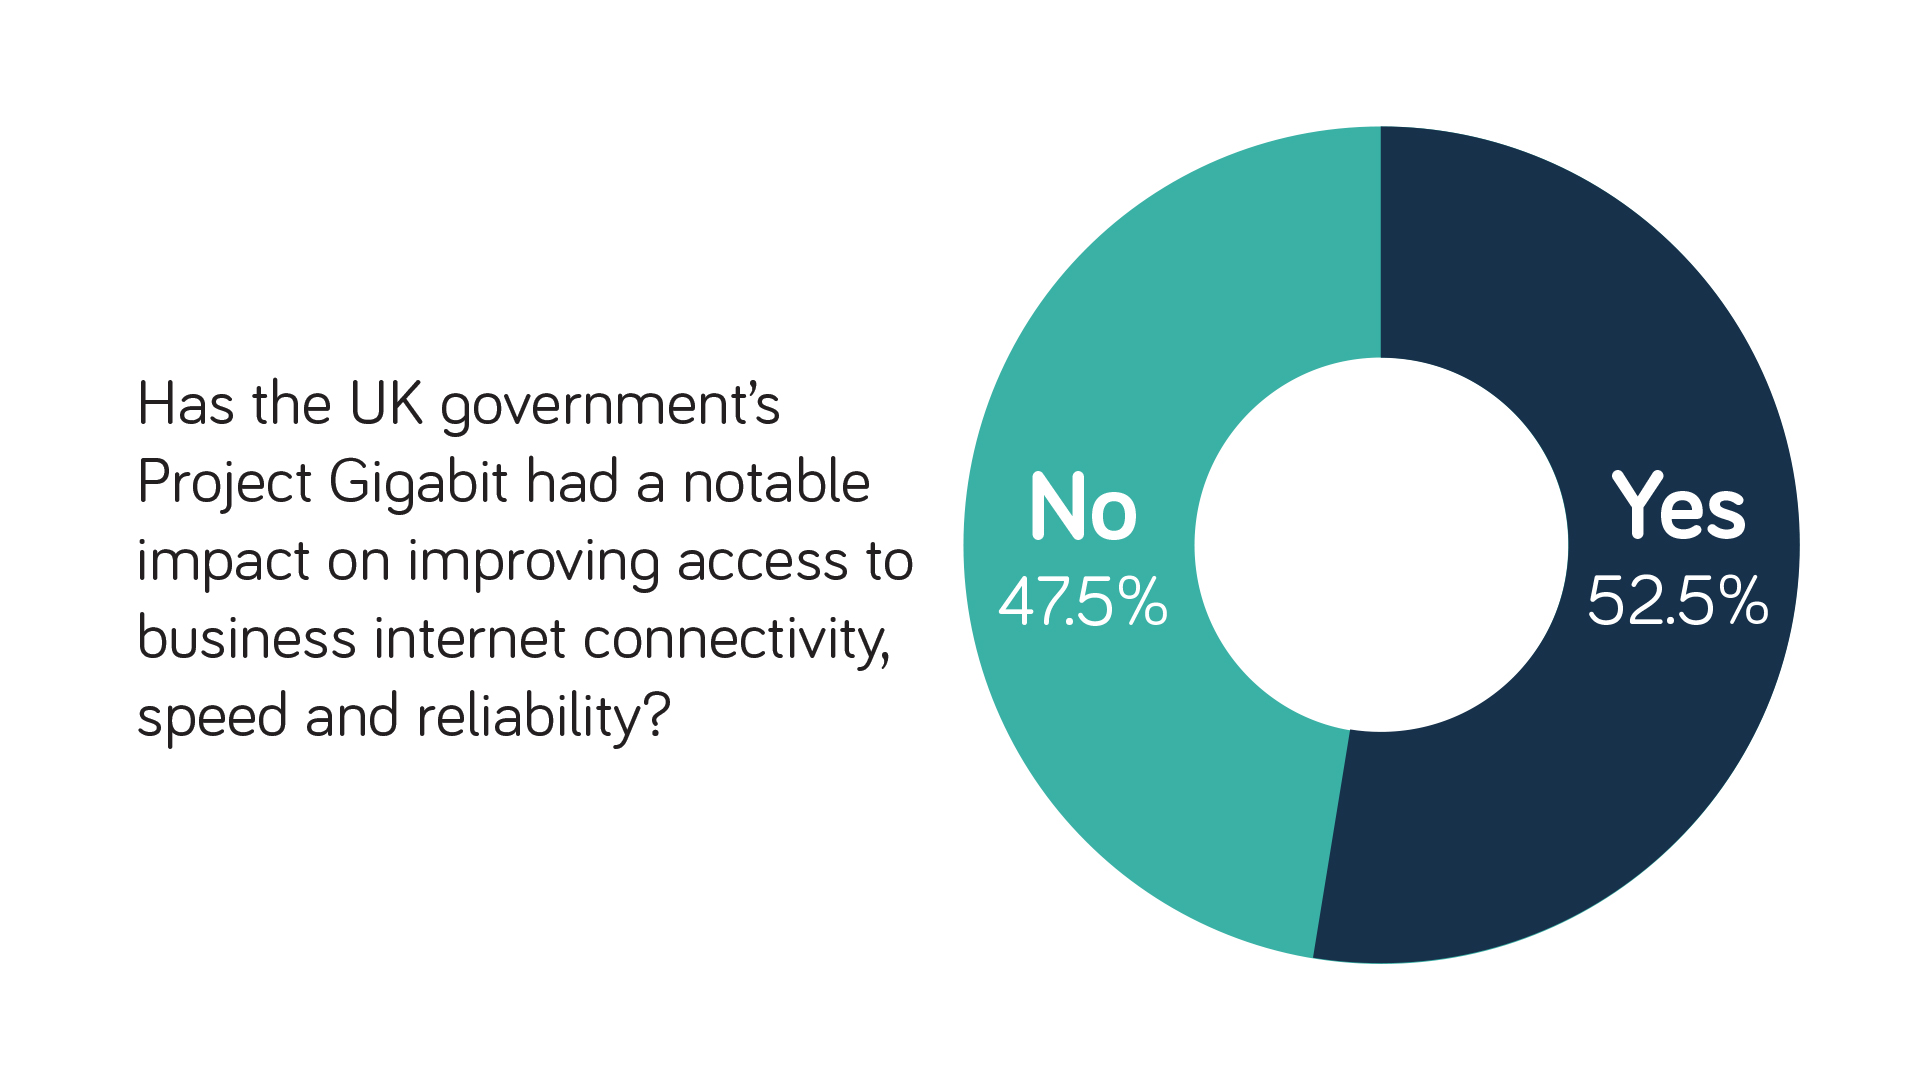 Pie chart: Has Project Gigabit had a notable impact on improving business internet connectivity?